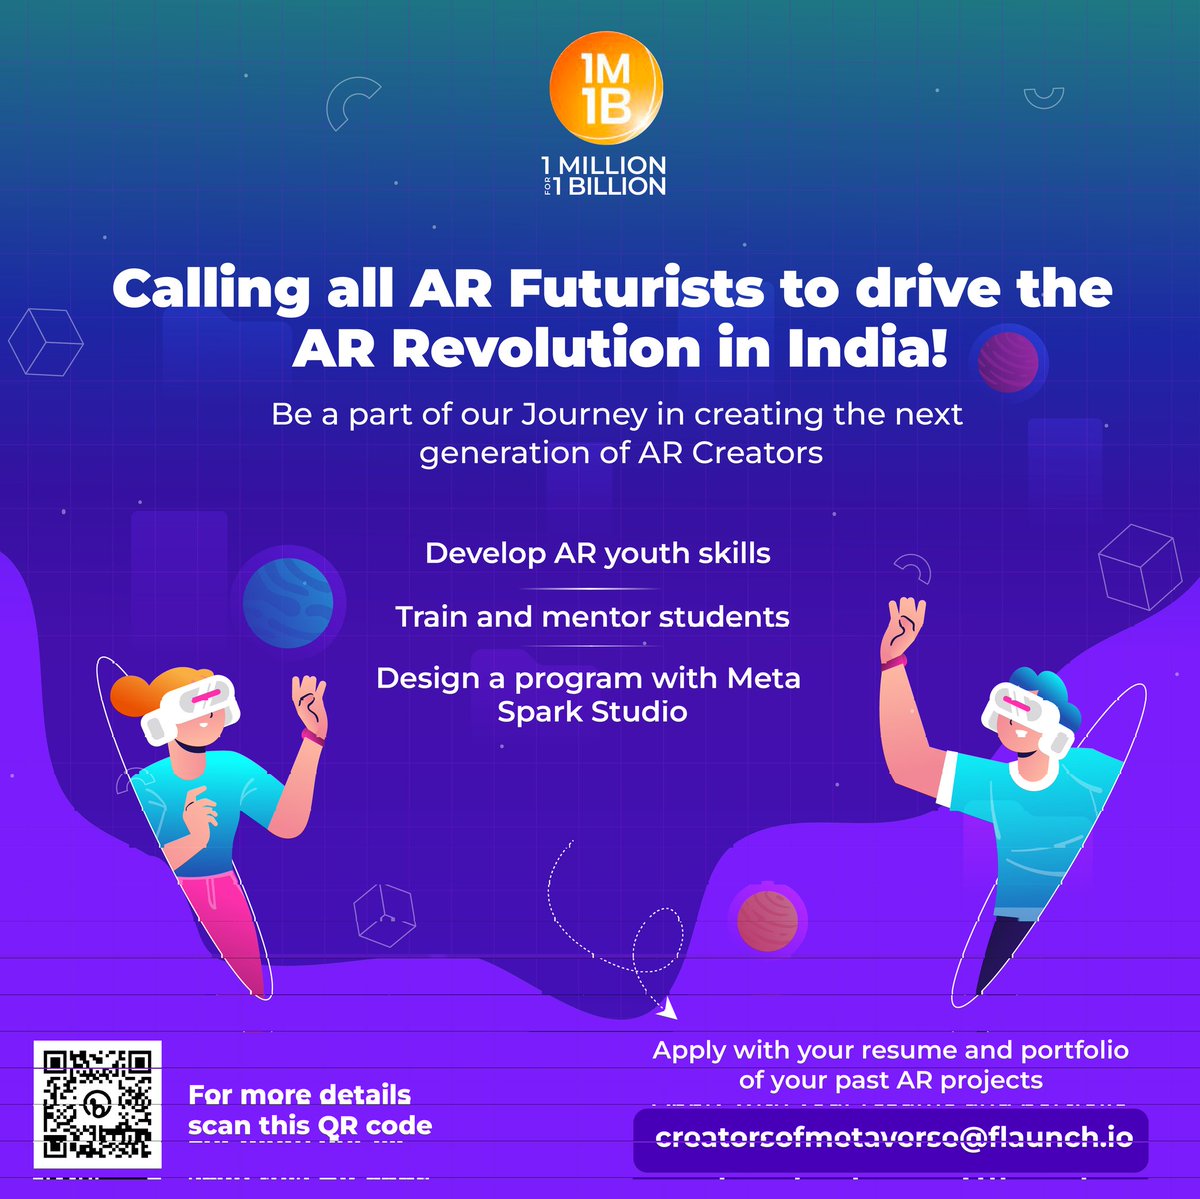 Looking for #ARcreators who can help in developing #youthskills in #AR through training & mentoring. 

Experience with #MetaSparkStudio is a must. 

For more info visit bit.ly/3Kots0i

#MetaSpark #arvr #artools #SparkAR #youthskilling